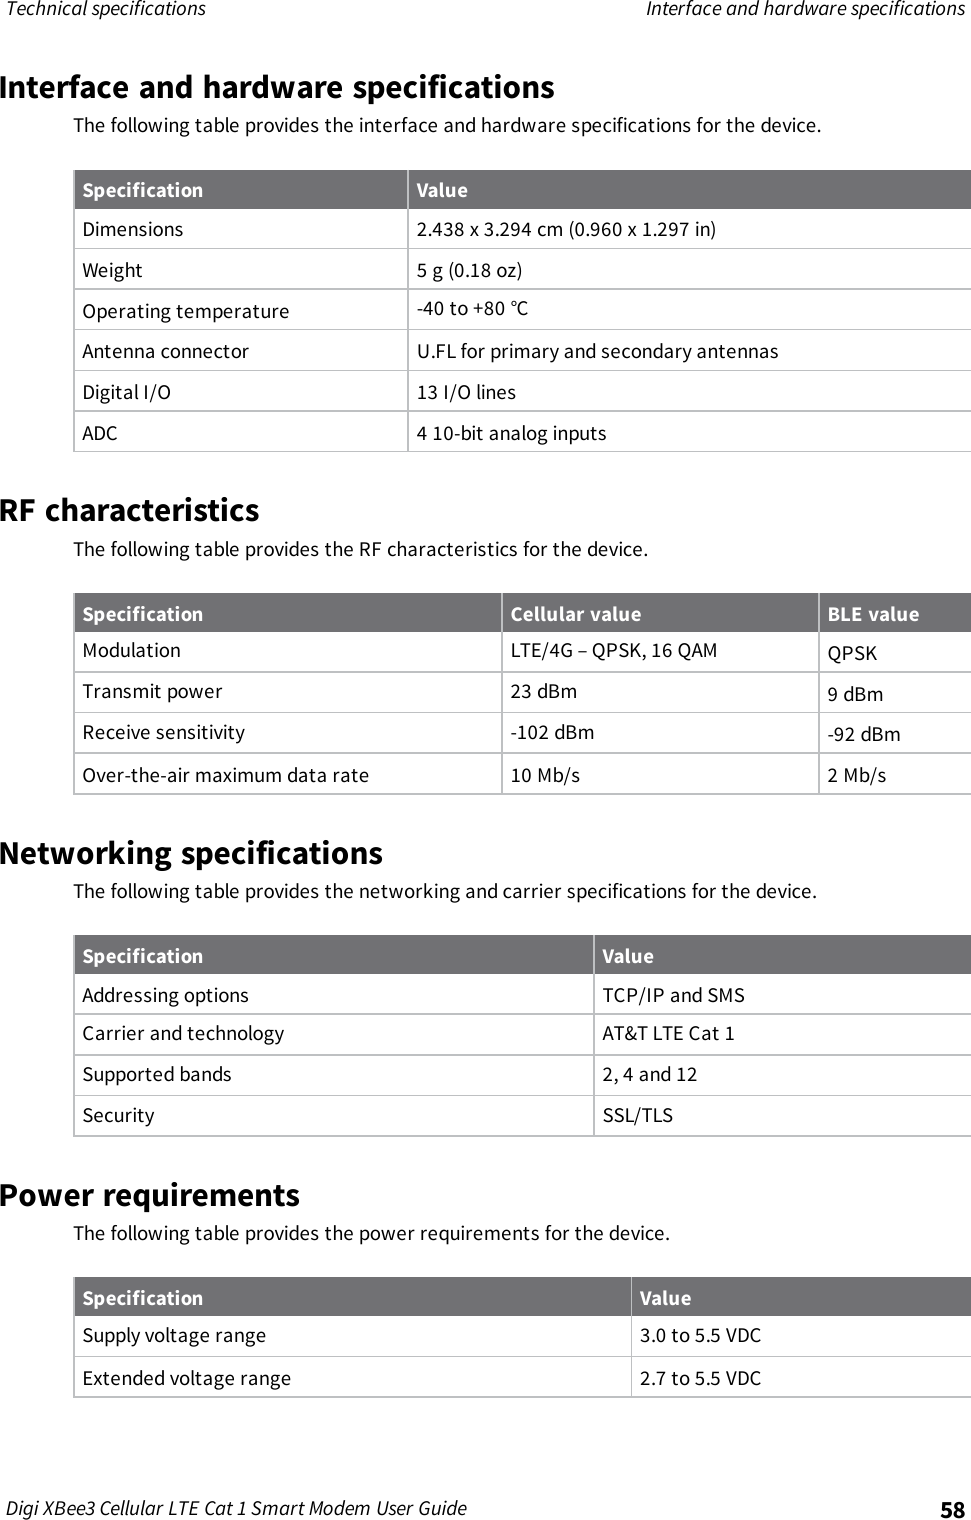 Technical specifications Interface and hardware specificationsDigi XBee3 Cellular LTE Cat 1 Smart Modem User Guide 58Interface and hardware specificationsThe following table provides the interface and hardware specifications for the device.Specification ValueDimensions 2.438 x 3.294 cm (0.960 x 1.297 in)Weight 5 g (0.18 oz)Operating temperature -40 to +80 °CAntenna connector U.FL for primary and secondary antennasDigital I/O 13 I/O linesADC 4 10-bit analog inputsRF characteristicsThe following table provides the RF characteristics for the device.Specification Cellular value BLE valueModulation LTE/4G – QPSK, 16 QAM QPSKTransmit power 23 dBm 9 dBmReceive sensitivity -102 dBm -92 dBmOver-the-air maximum data rate 10 Mb/s 2 Mb/sNetworking specificationsThe following table provides the networking and carrier specifications for the device.Specification ValueAddressing options TCP/IPand SMSCarrier and technology AT&amp;T LTE Cat 1Supported bands 2, 4 and 12Security SSL/TLSPower requirementsThe following table provides the power requirements for the device.Specification ValueSupply voltage range 3.0 to 5.5 VDCExtended voltage range 2.7 to 5.5 VDC